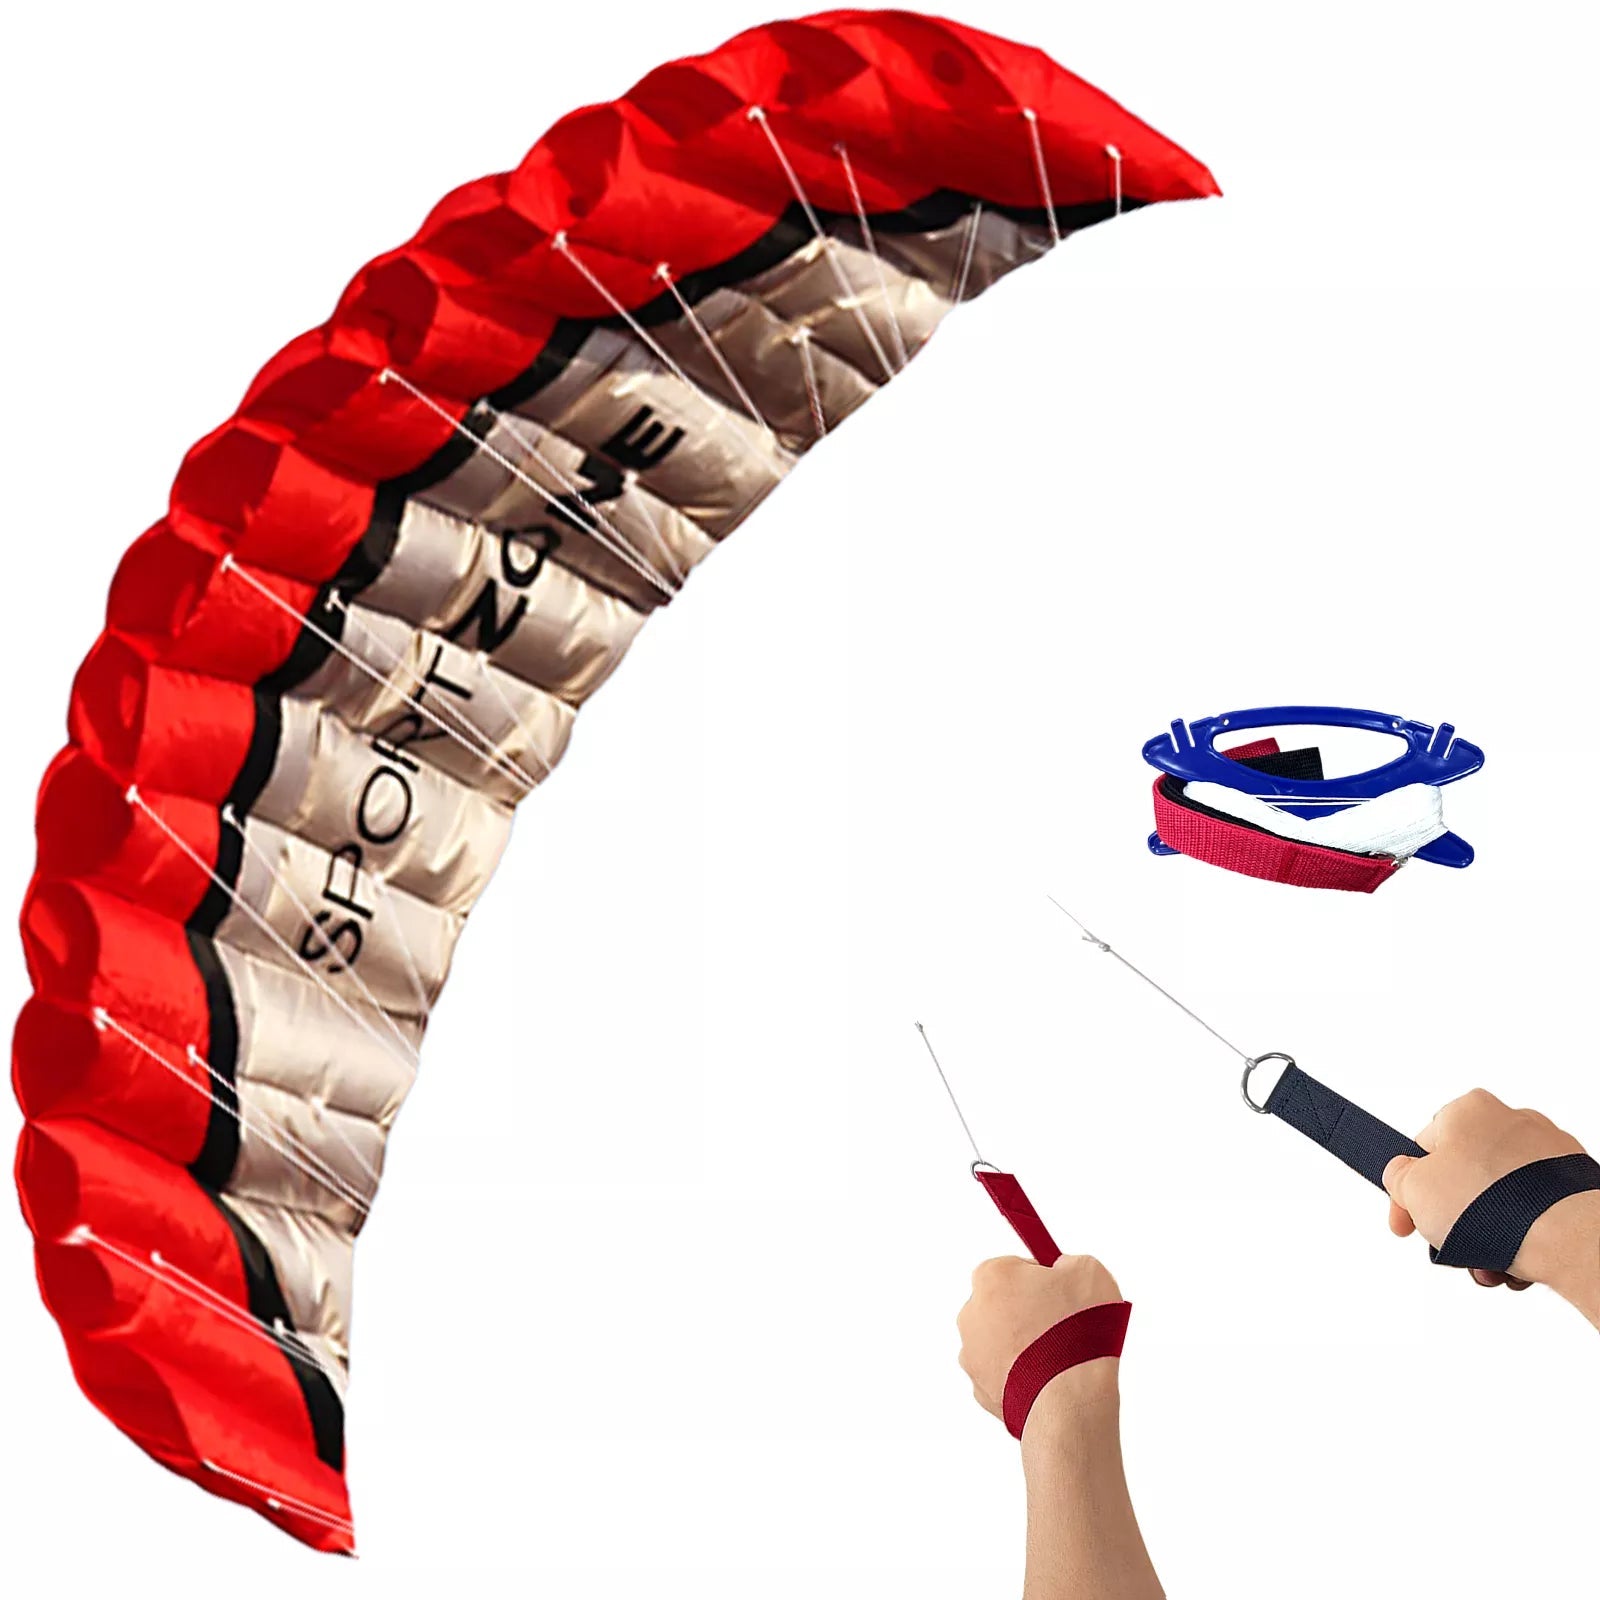 High Quality Red Dual Line Parafoil Kite Kit with Flying Tools - ToylandEU